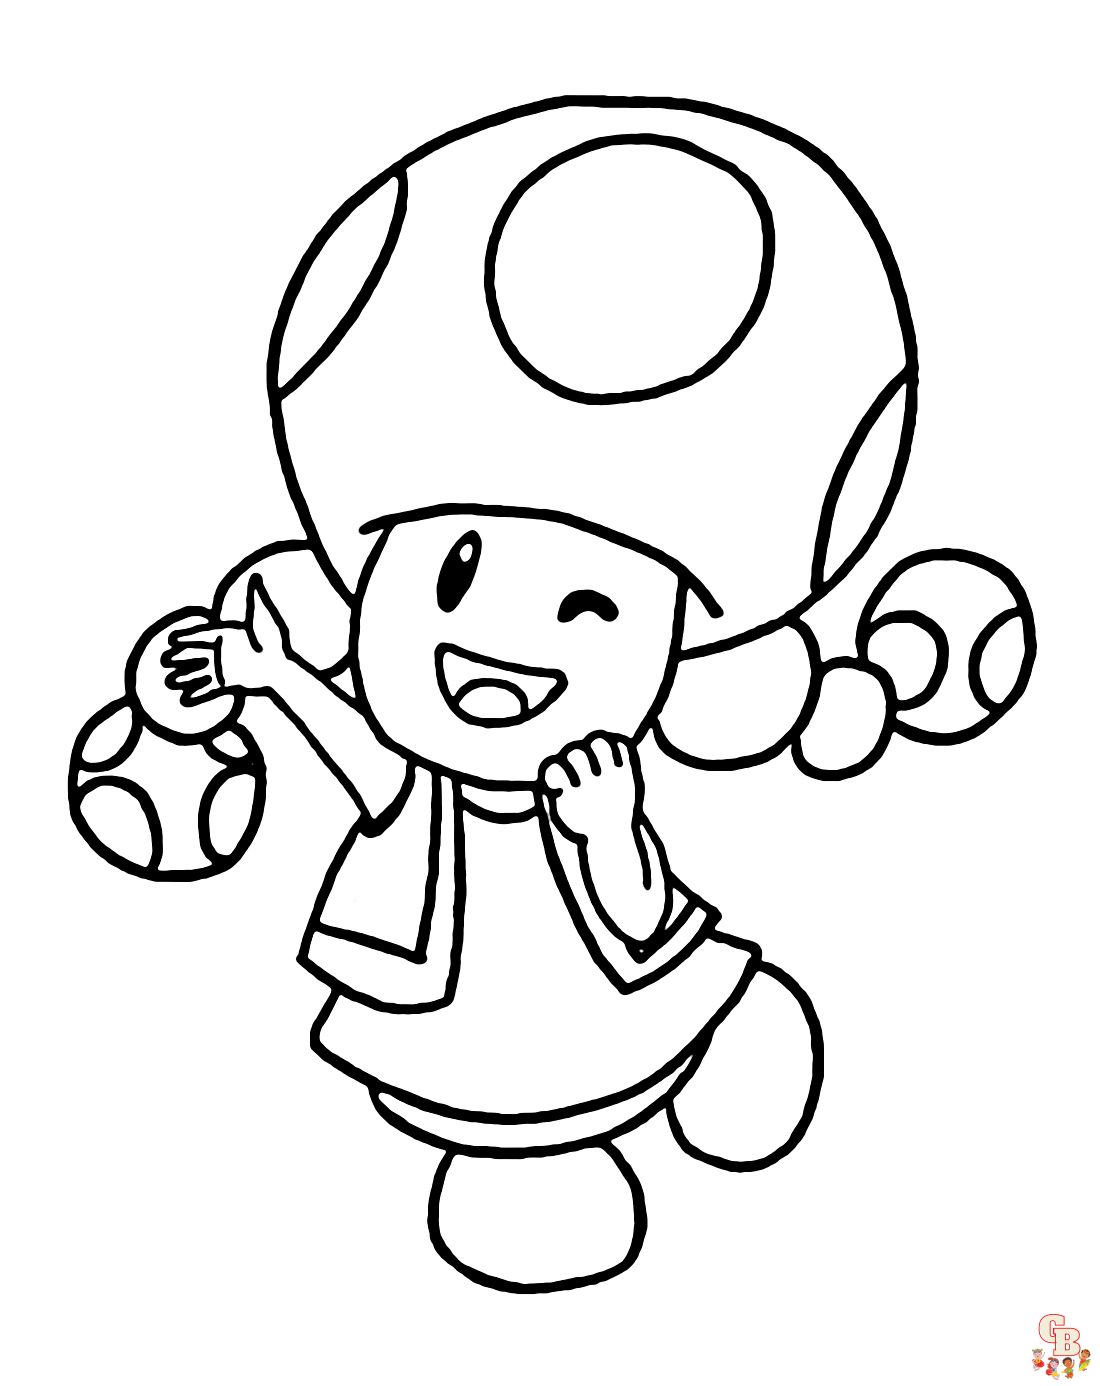 Printable toadette coloring sheets